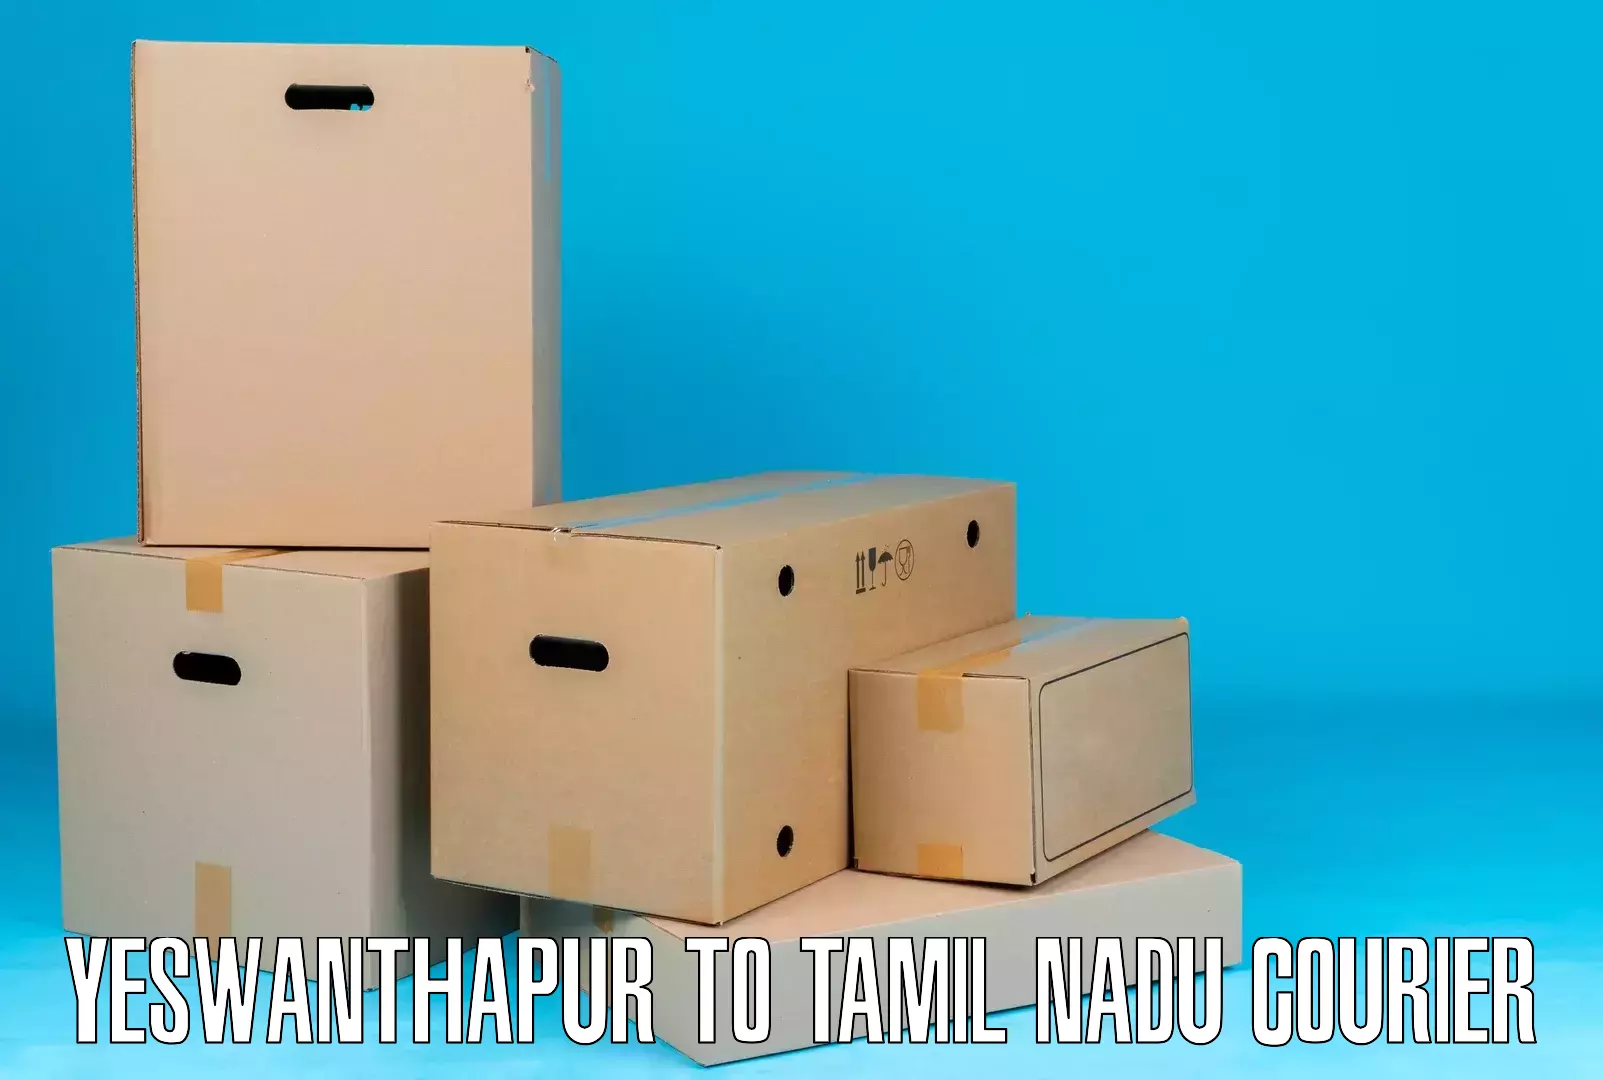 Professional courier services Yeswanthapur to Perambur